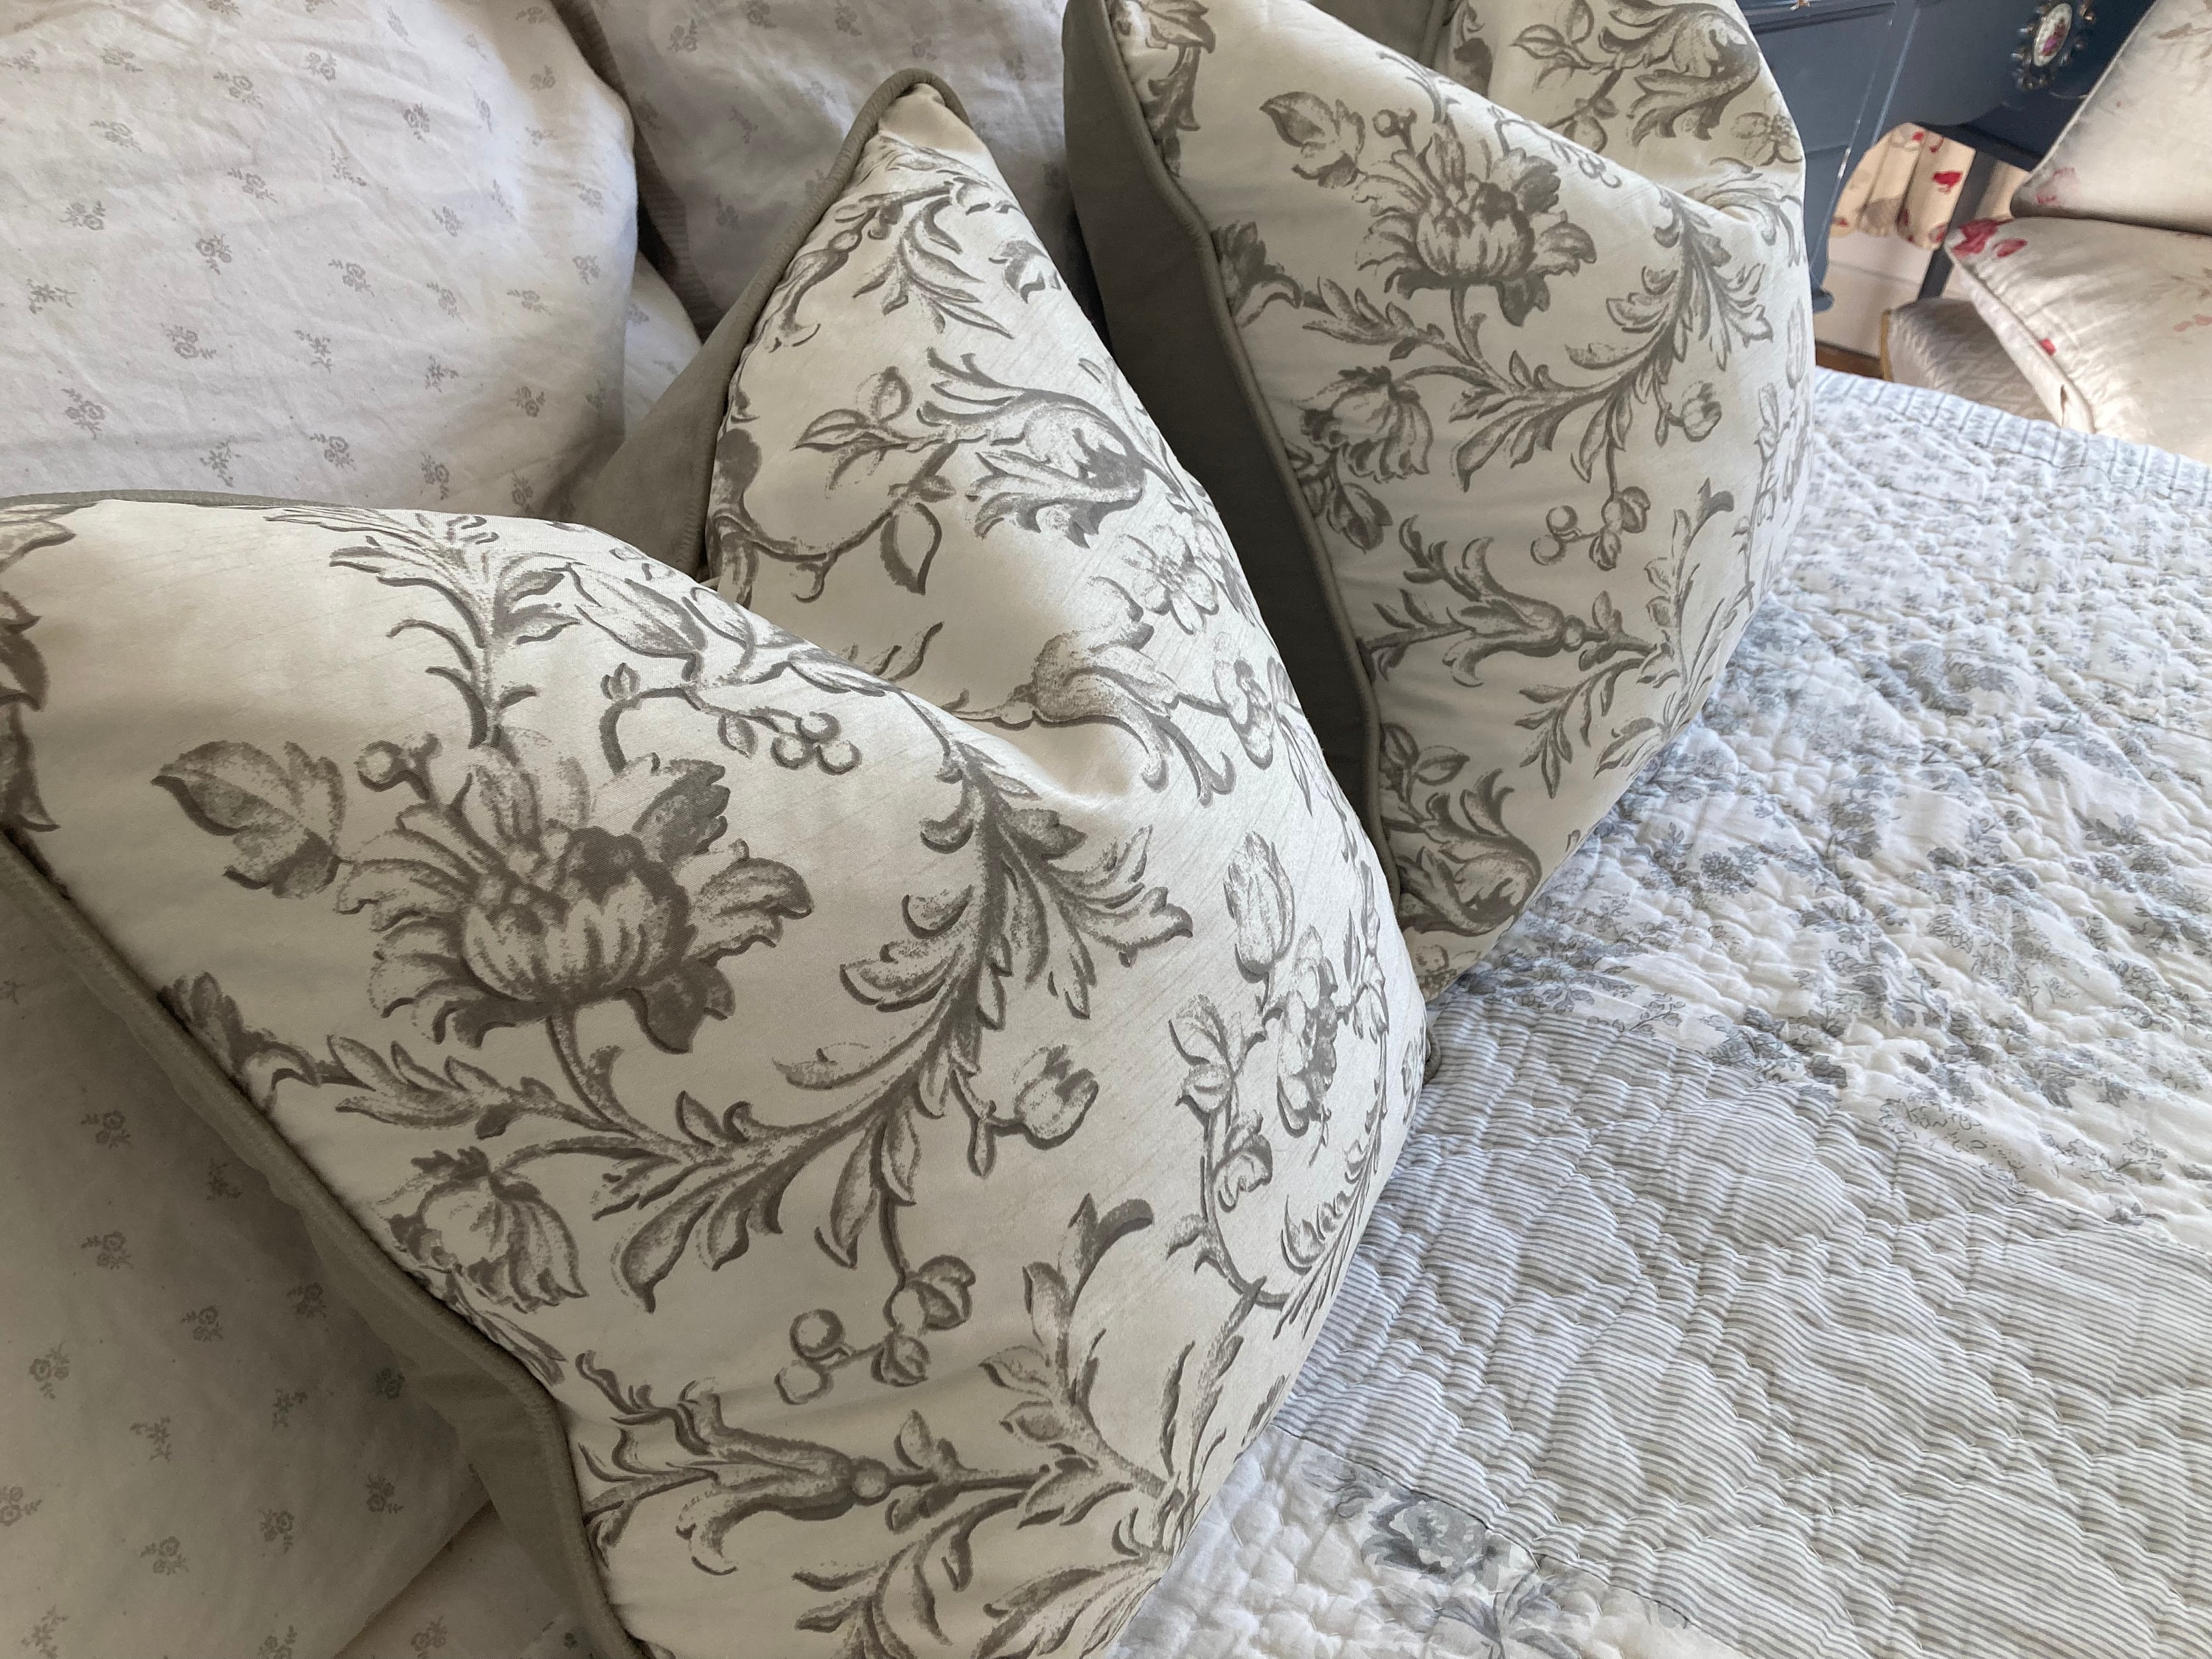 A 18" Cushion Cover in Laura Ashley Isodore Linen fabric both sides & piped edge 